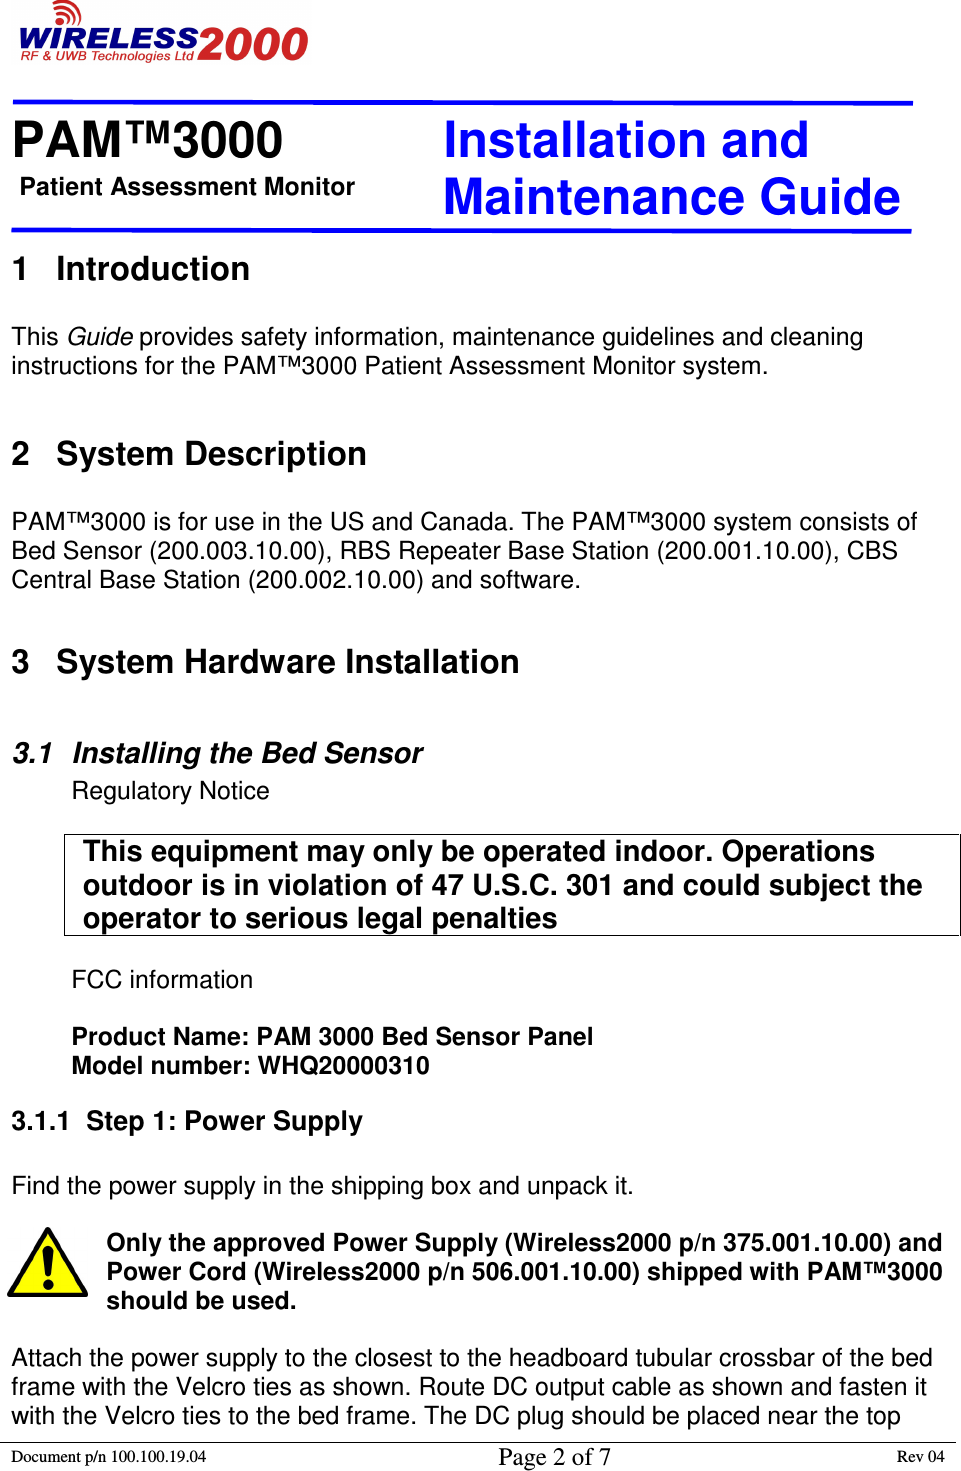 Patient Assessment Monitor                                                                  PAM™3000                       Installation and   Maintenance Guide  Document p/n 100.100.19.04 Page 2 of 7 Rev 04                                                                                                                                         1  Introduction  This Guide provides safety information, maintenance guidelines and cleaning instructions for the PAM™3000 Patient Assessment Monitor system.   2  System Description  PAM™3000 is for use in the US and Canada. The PAM™3000 system consists of Bed Sensor (200.003.10.00), RBS Repeater Base Station (200.001.10.00), CBS Central Base Station (200.002.10.00) and software.  3  System Hardware Installation  3.1  Installing the Bed Sensor Regulatory Notice  This equipment may only be operated indoor. Operations outdoor is in violation of 47 U.S.C. 301 and could subject the operator to serious legal penalties   FCC information  Product Name: PAM 3000 Bed Sensor Panel Model number: WHQ20000310 3.1.1  Step 1: Power Supply  Find the power supply in the shipping box and unpack it.   Only the approved Power Supply (Wireless2000 p/n 375.001.10.00) and Power Cord (Wireless2000 p/n 506.001.10.00) shipped with PAM™3000 should be used.   Attach the power supply to the closest to the headboard tubular crossbar of the bed frame with the Velcro ties as shown. Route DC output cable as shown and fasten it with the Velcro ties to the bed frame. The DC plug should be placed near the top 